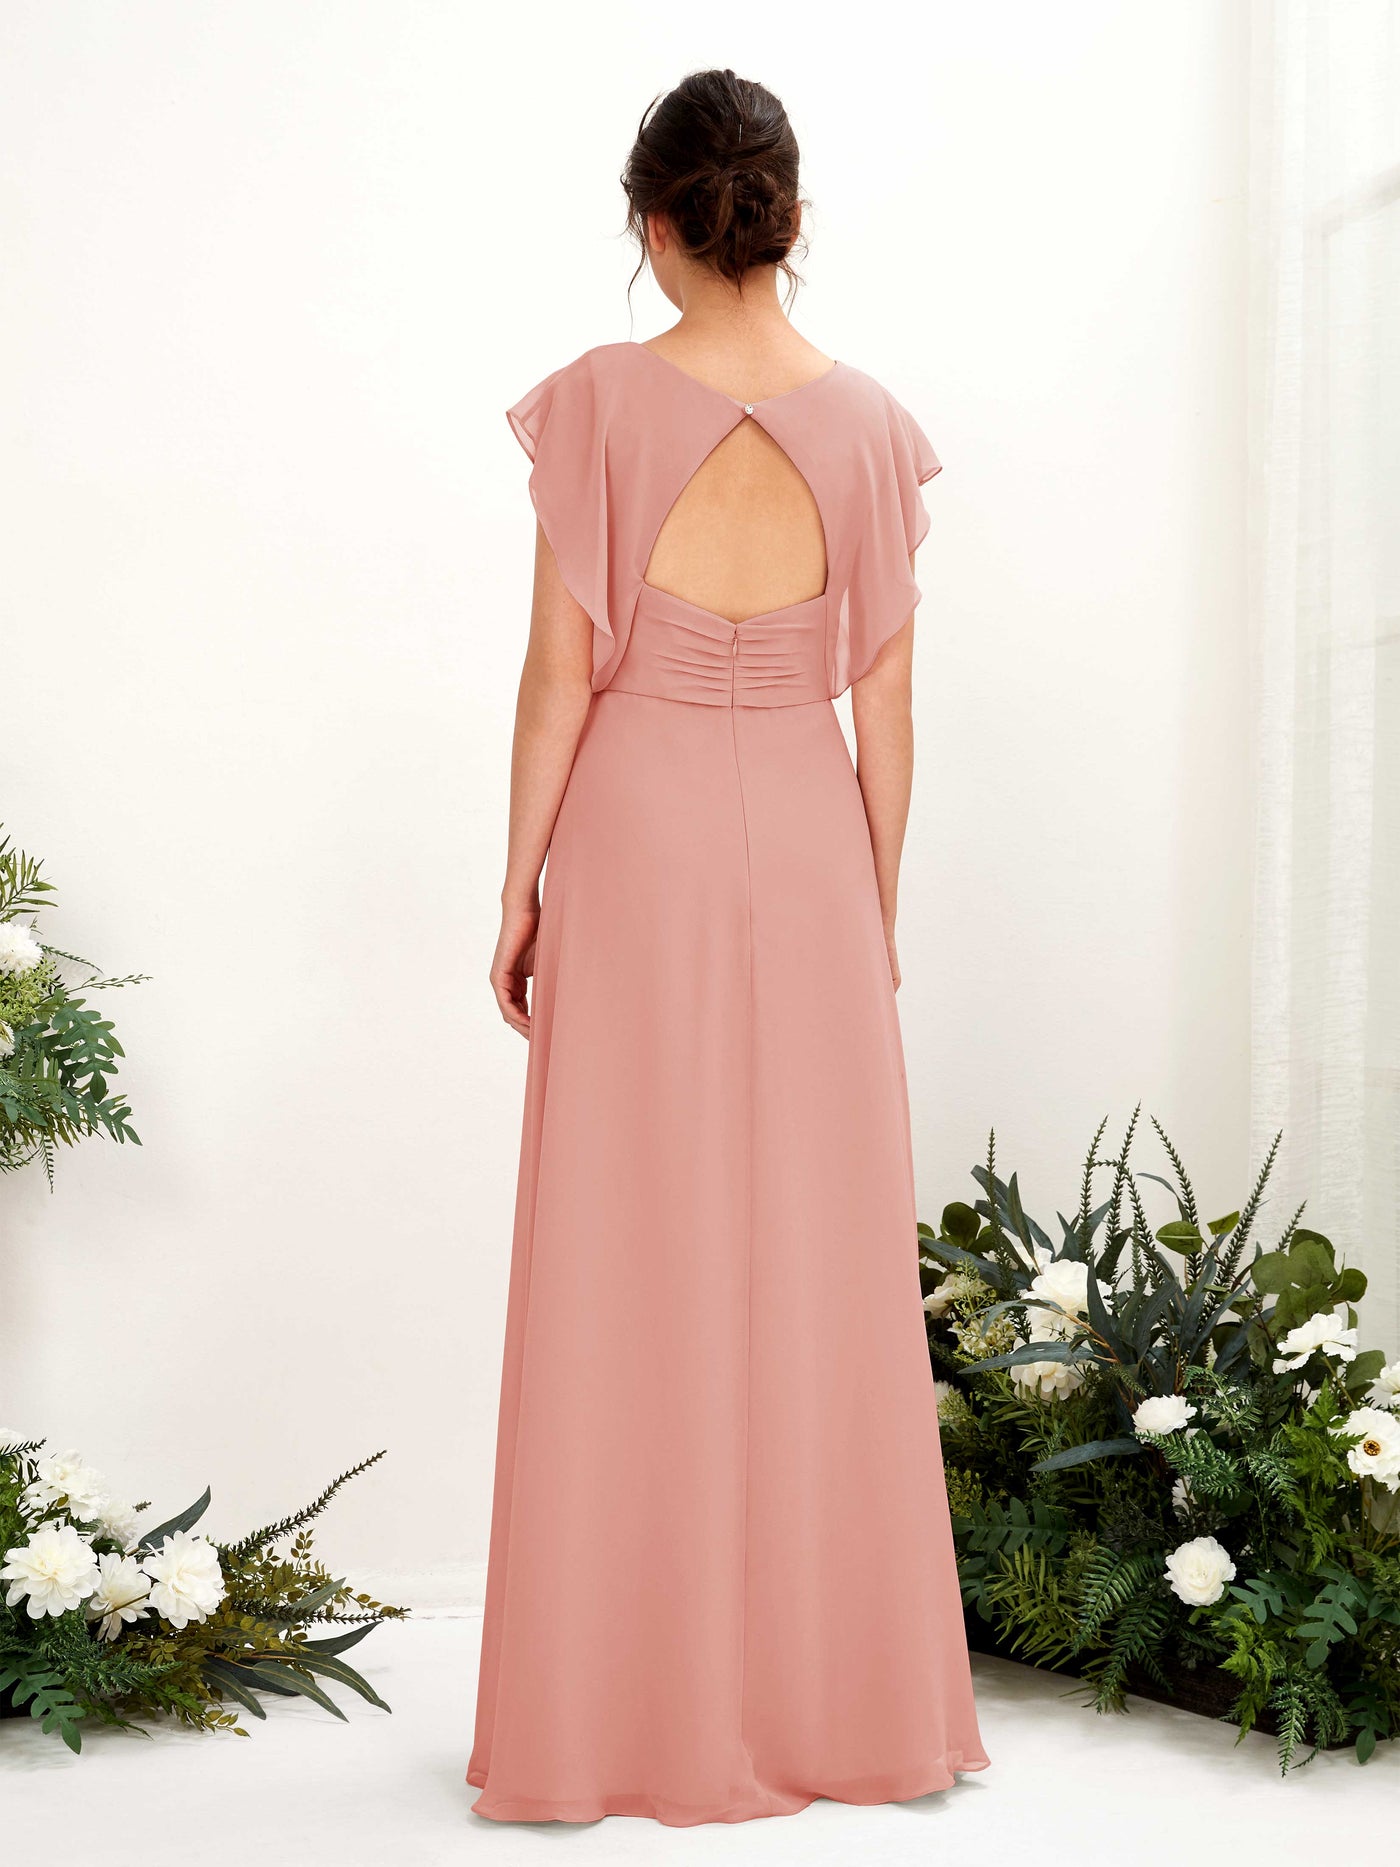 Champagne Rose Bridesmaid Dresses Bridesmaid Dress A-line Chiffon V-neck Full Length Short Sleeves Wedding Party Dress (81225606)#color_champagne-rose